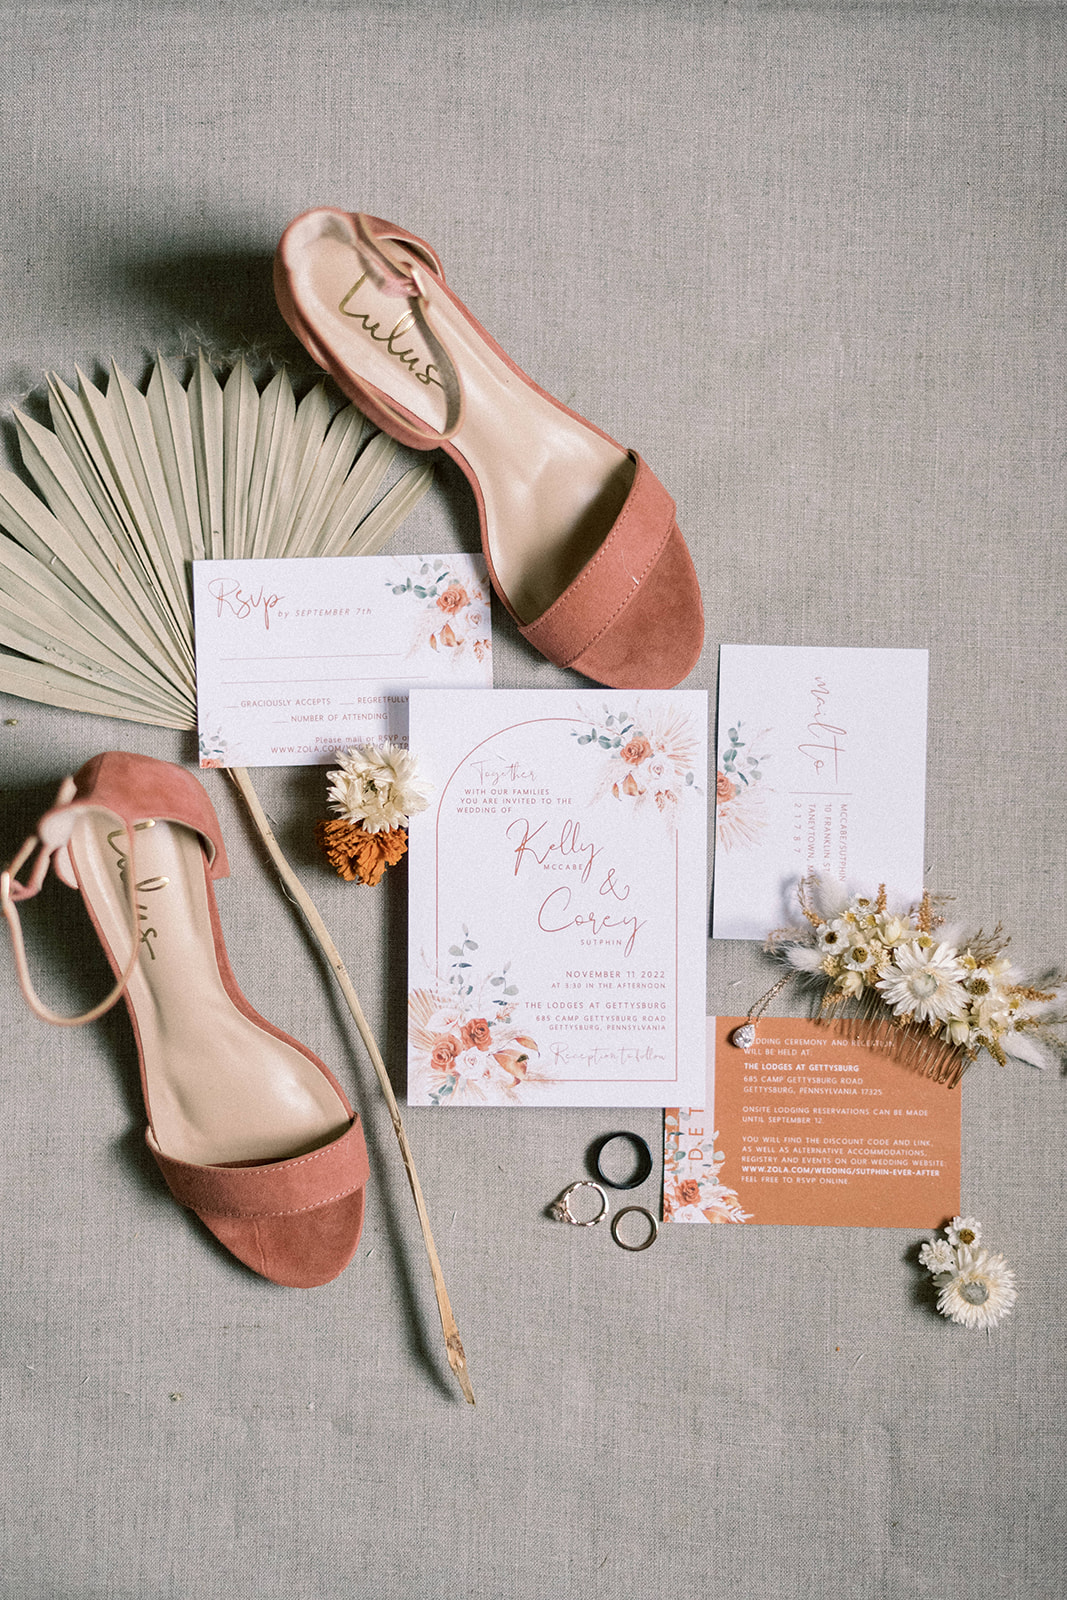 Pennsylvania wedding photographer captures boho inspired wedding details with wedding invitations and rust colored shoes